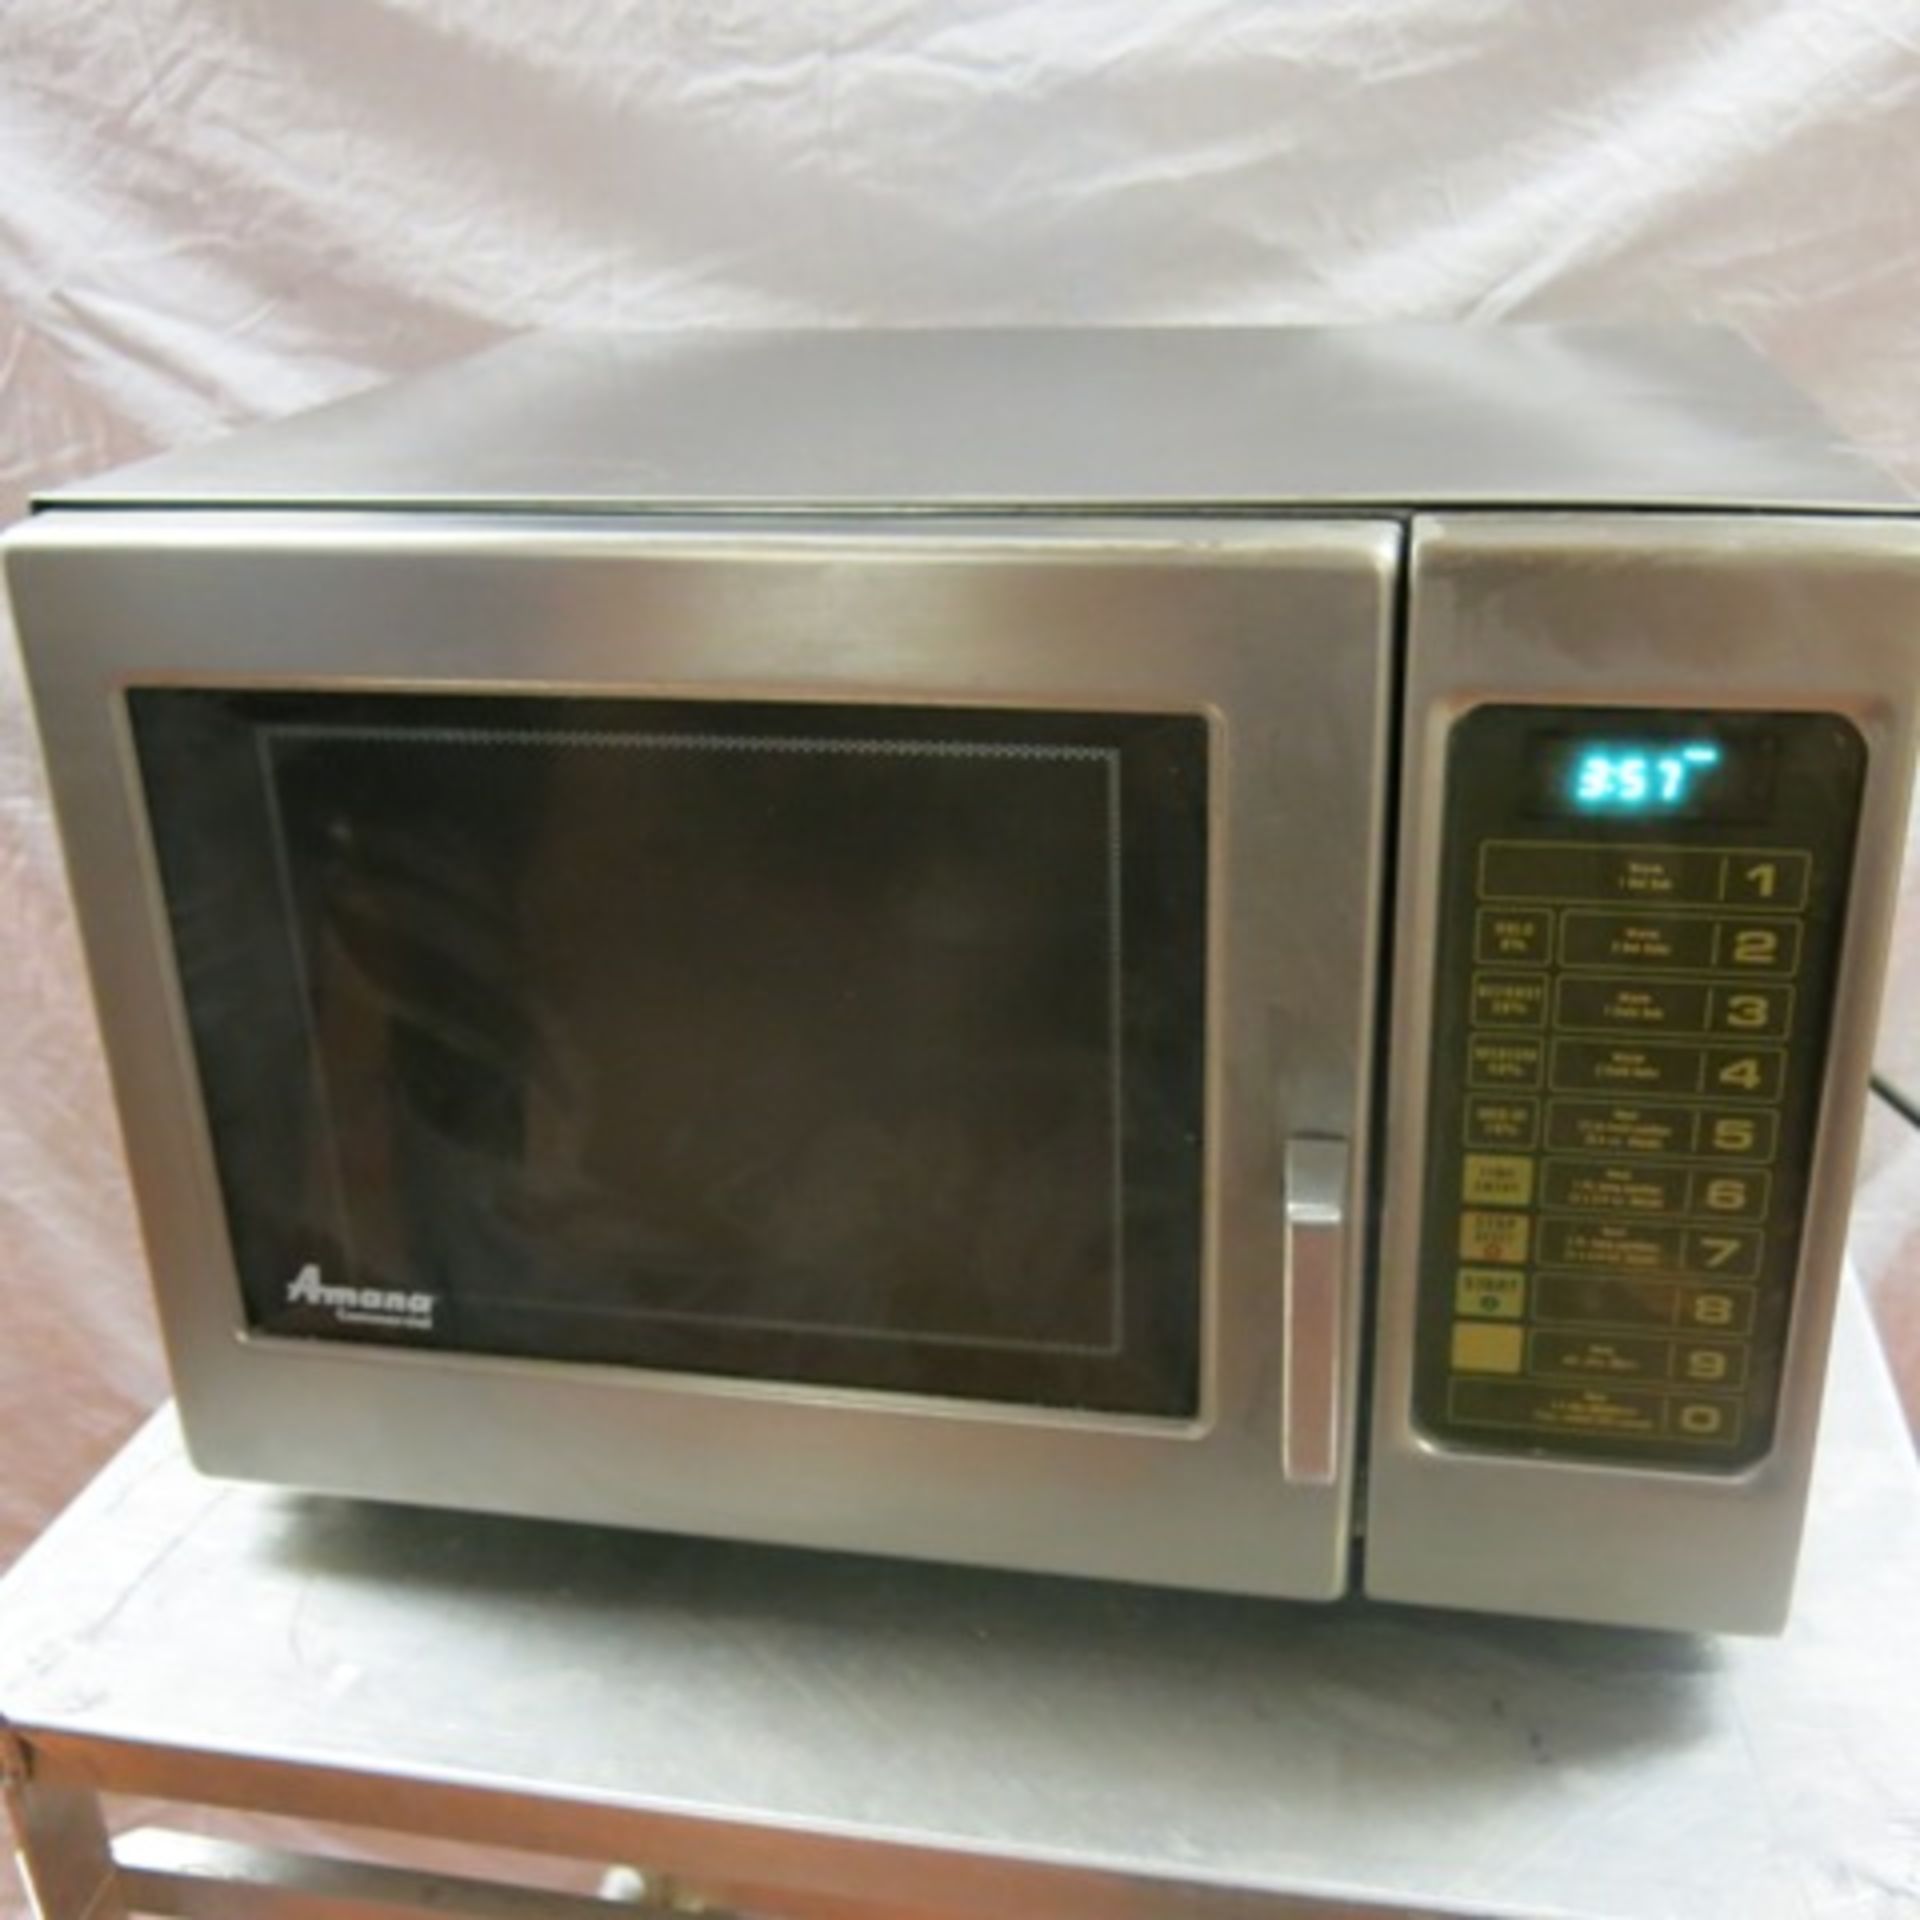 Amana Commercial Stainless Steel 1300W Microwave Oven, Model URFS511. - Image 2 of 6